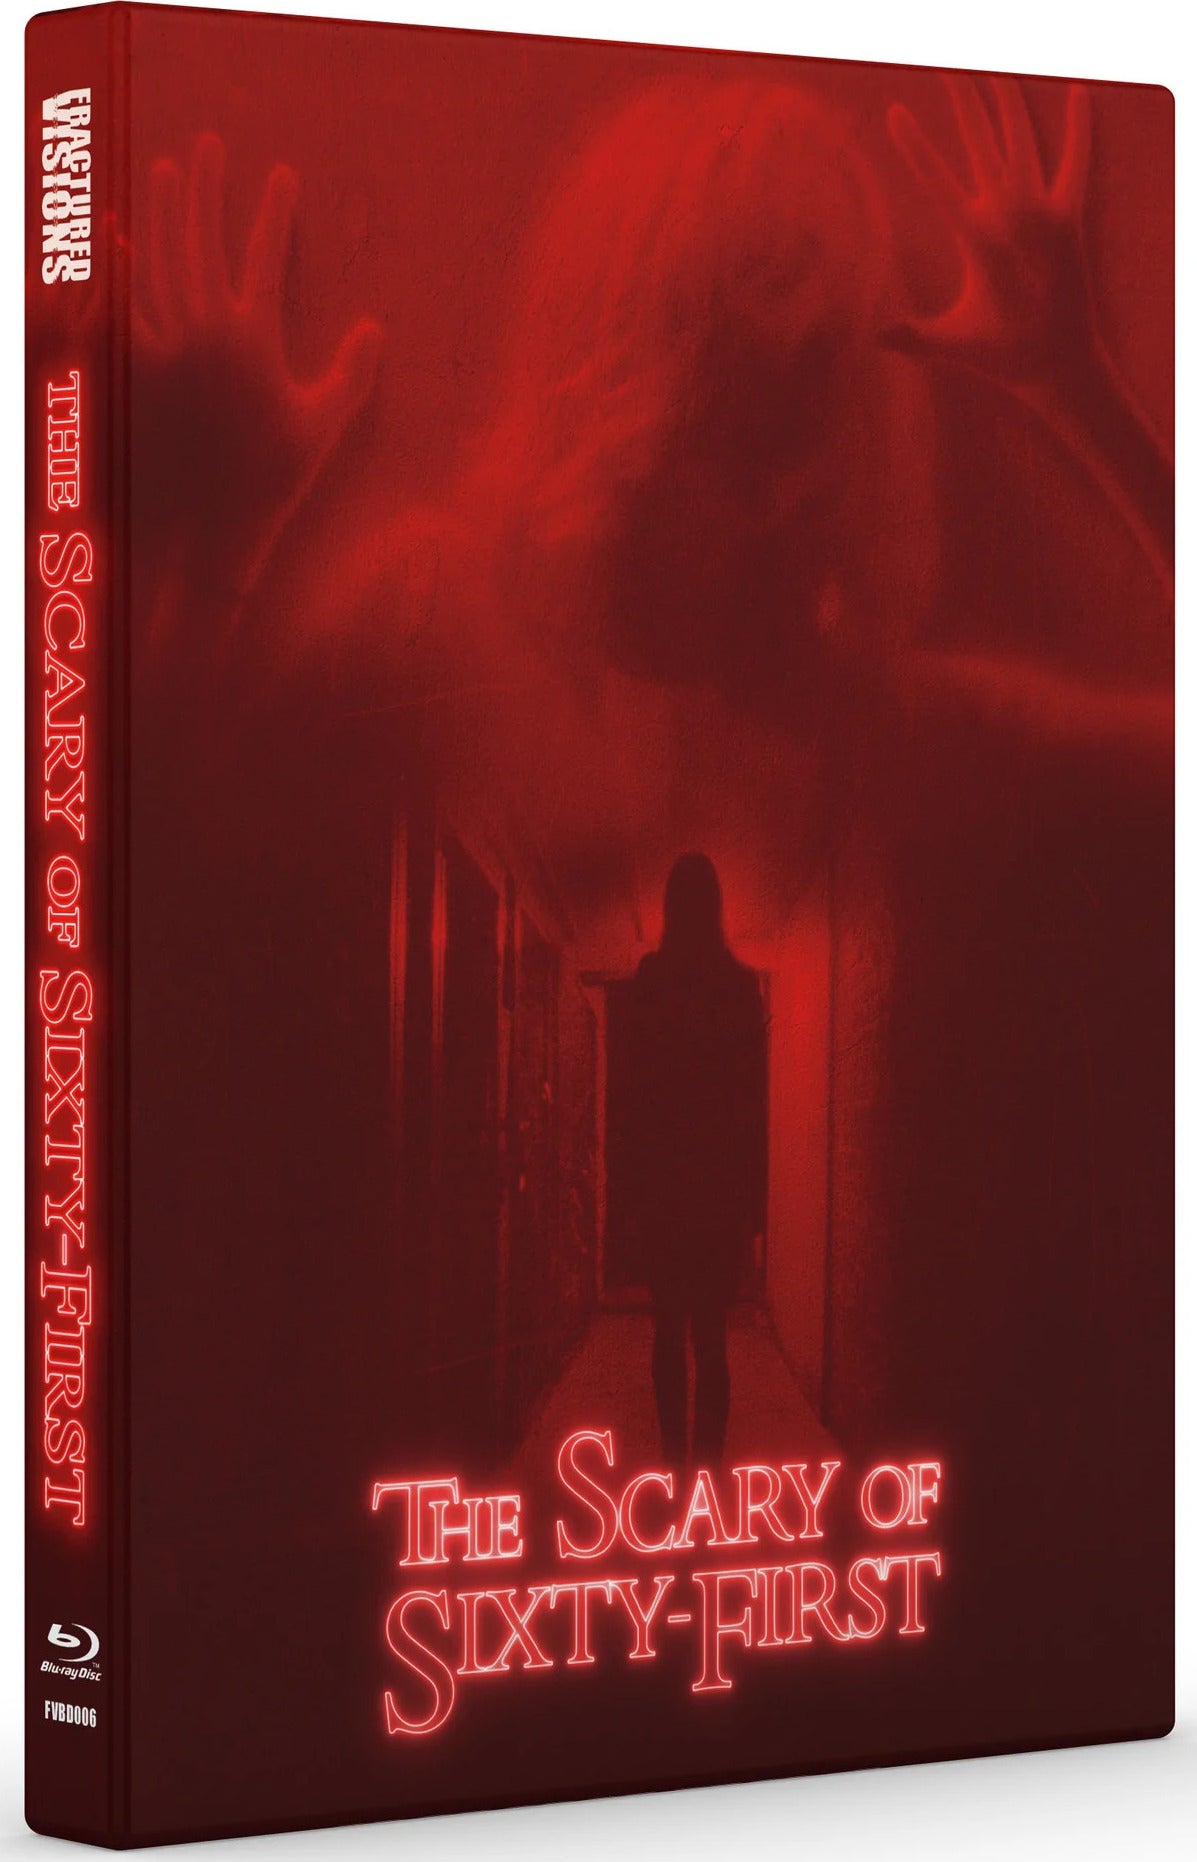 THE SCARY OF SIXTY-FIRST (REGION B IMPORT) BLU-RAY